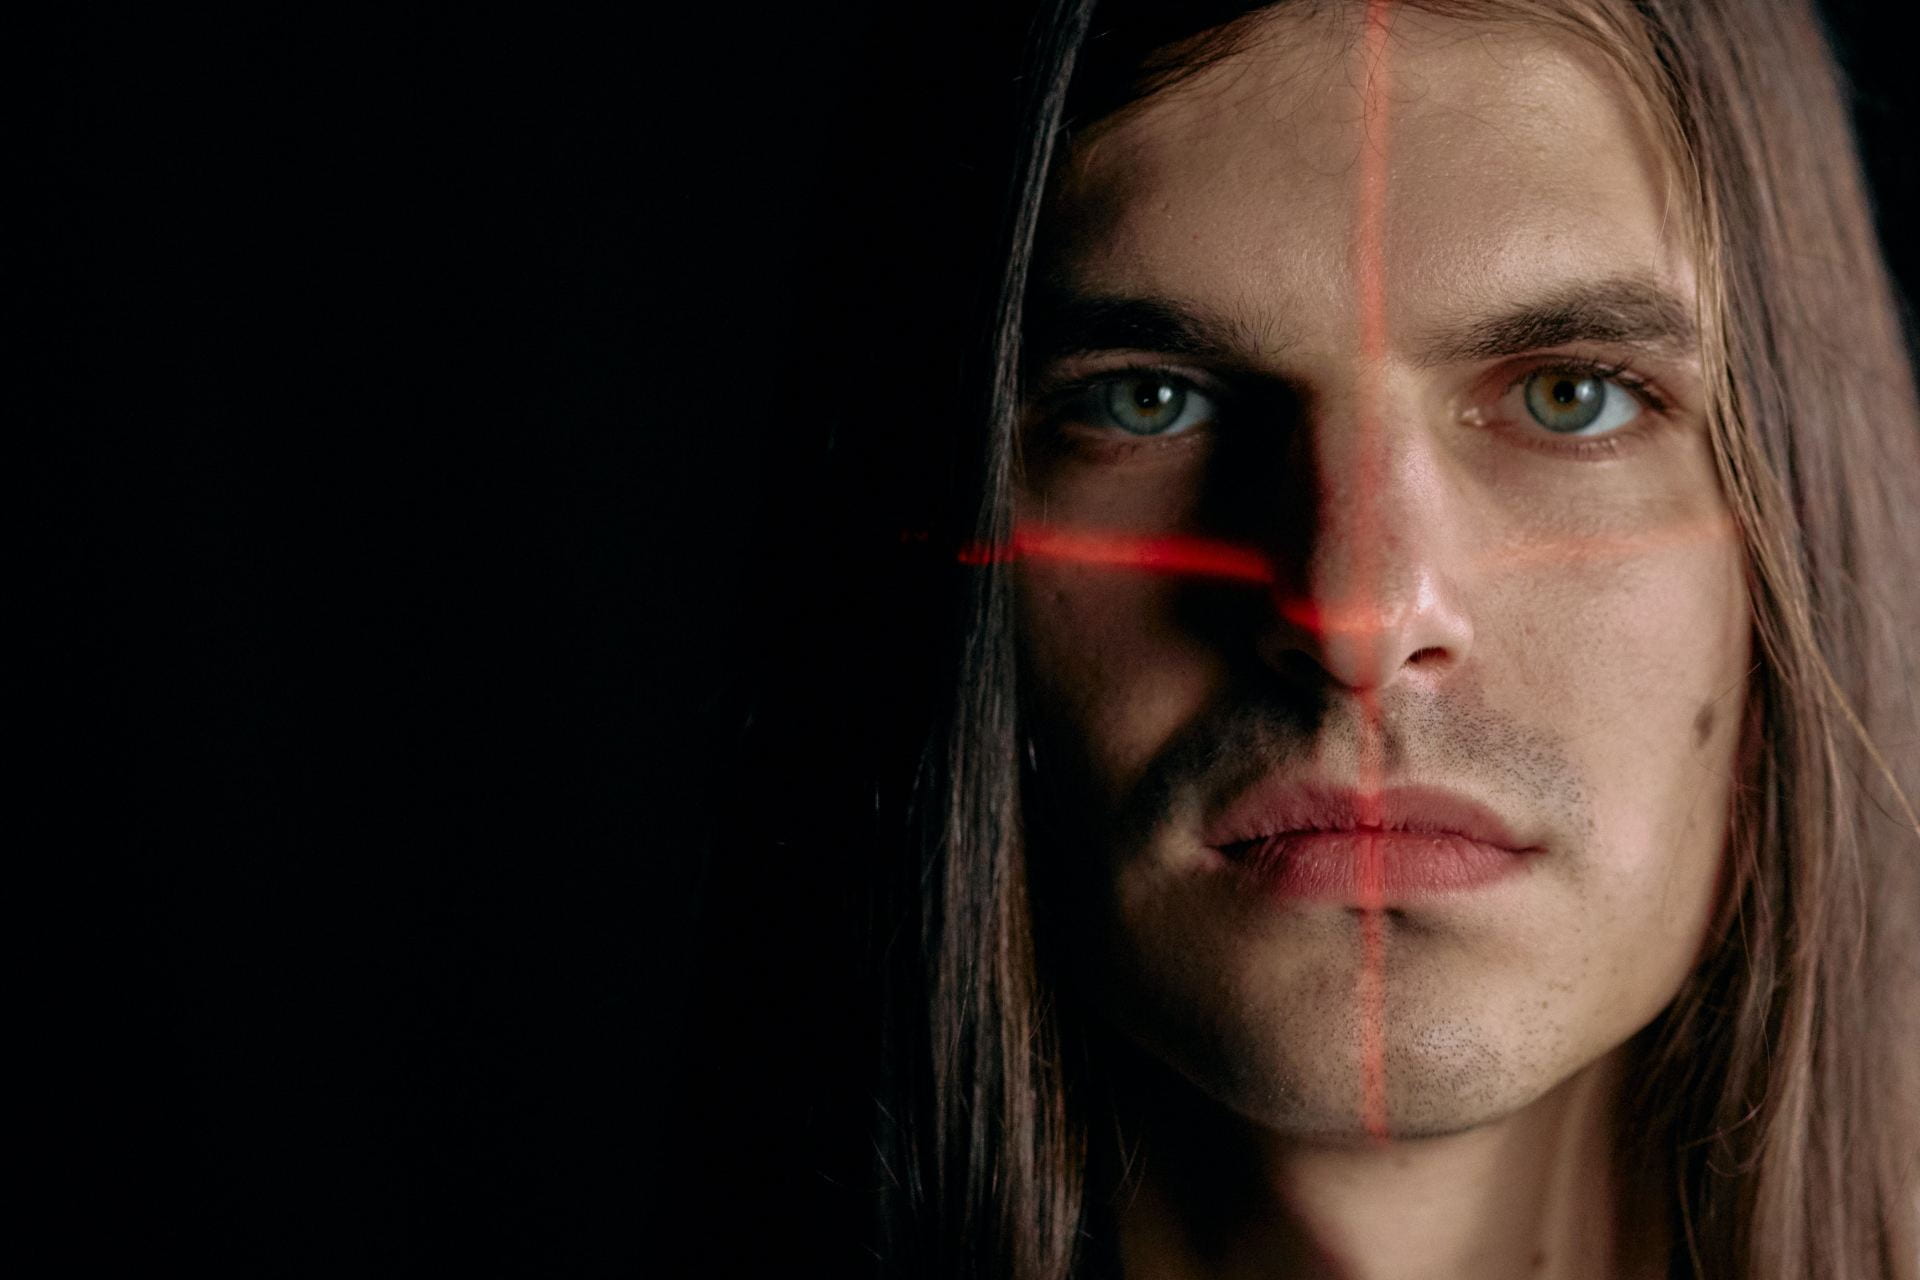 Facial recognition stock image featuring man with red scanning lights on his face.